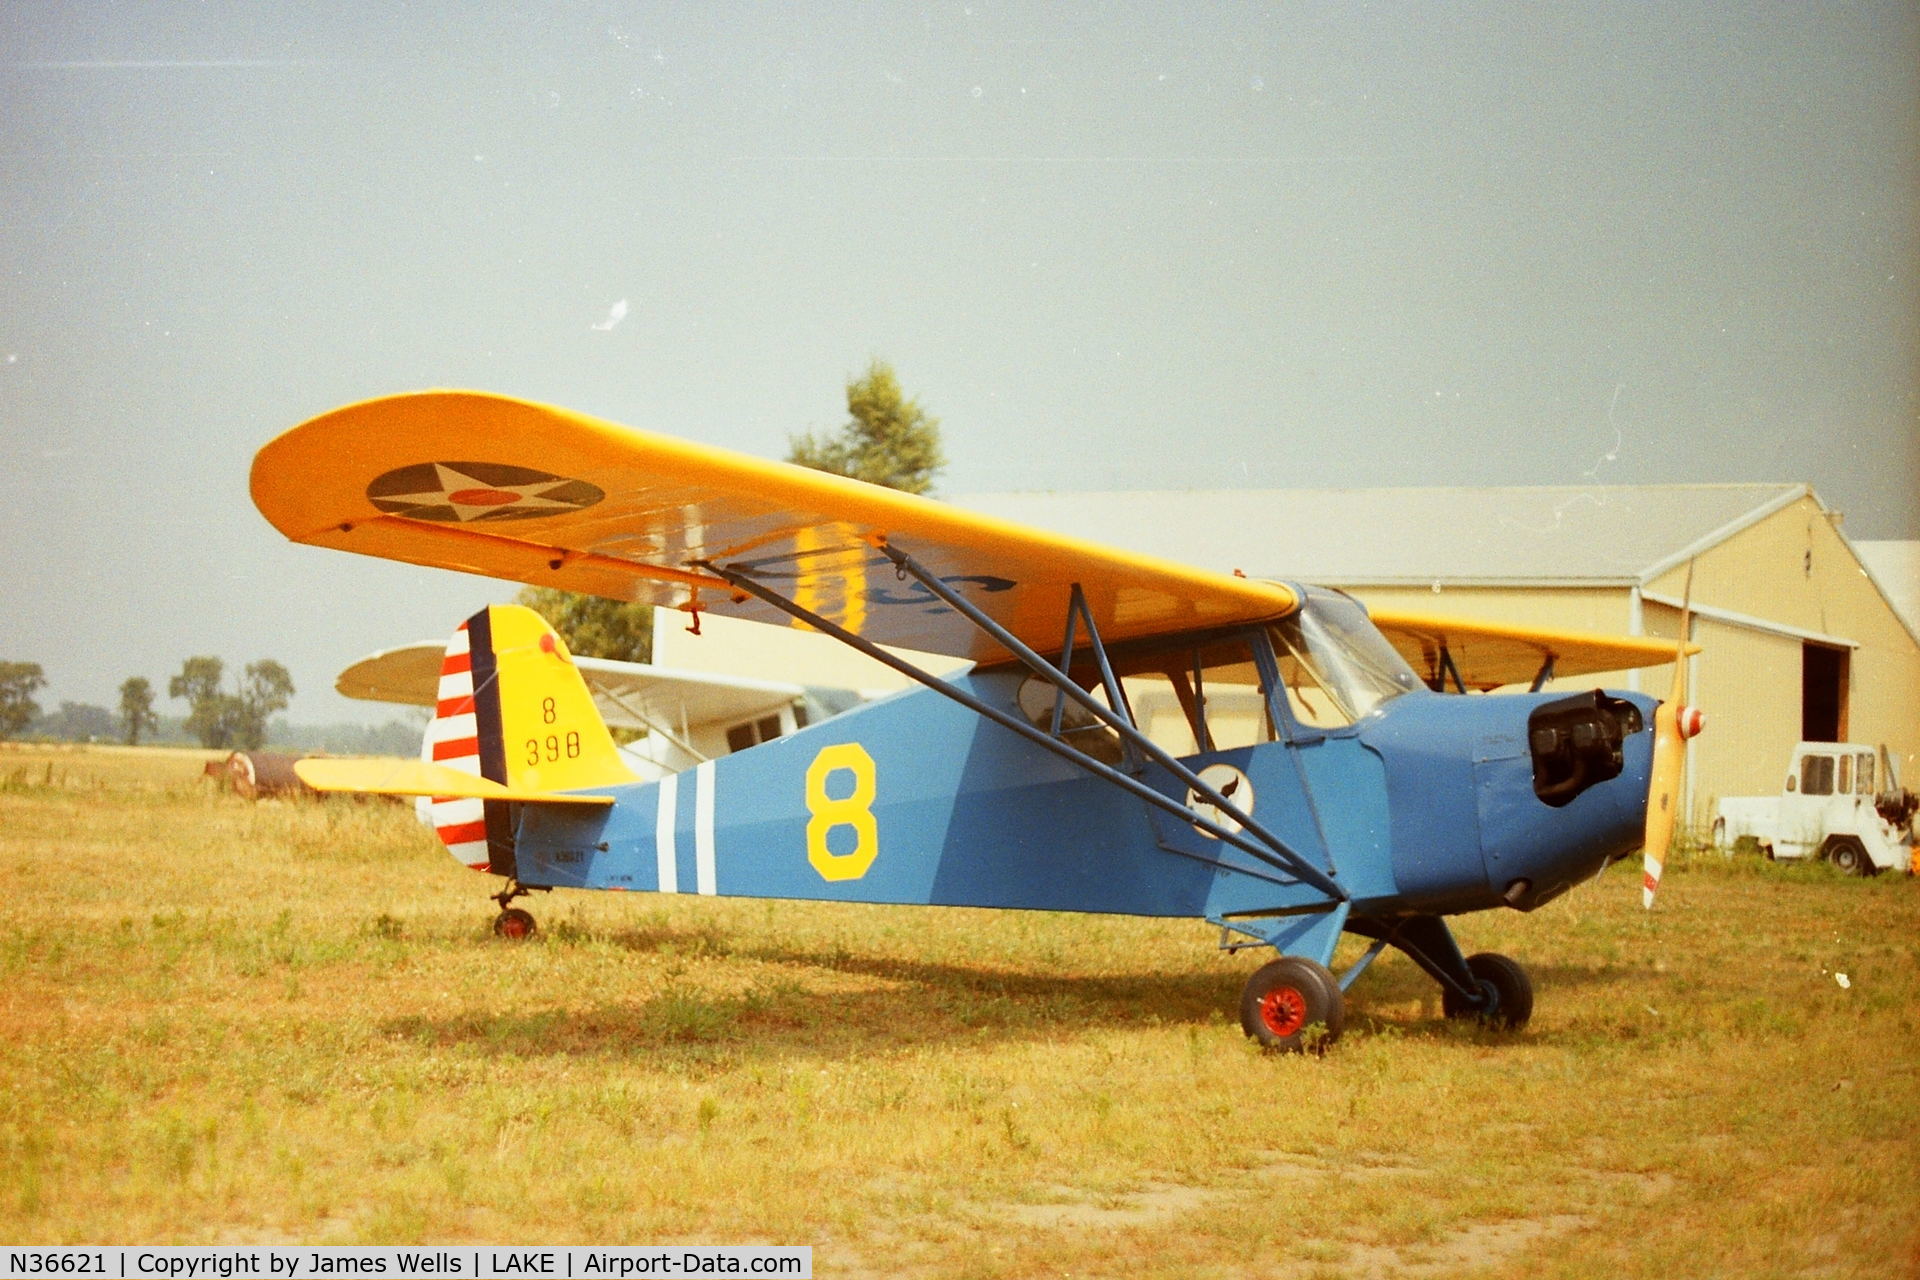 N36621, Aeronca 65-TAC C/N C1081TA, I bought 36621 serial number C1081TA  06/15/1989. I donated it to the museum of flight in 1991 I believe. I have some of the paper work and lots more photos if interested? If the new owner has any questions let them know.